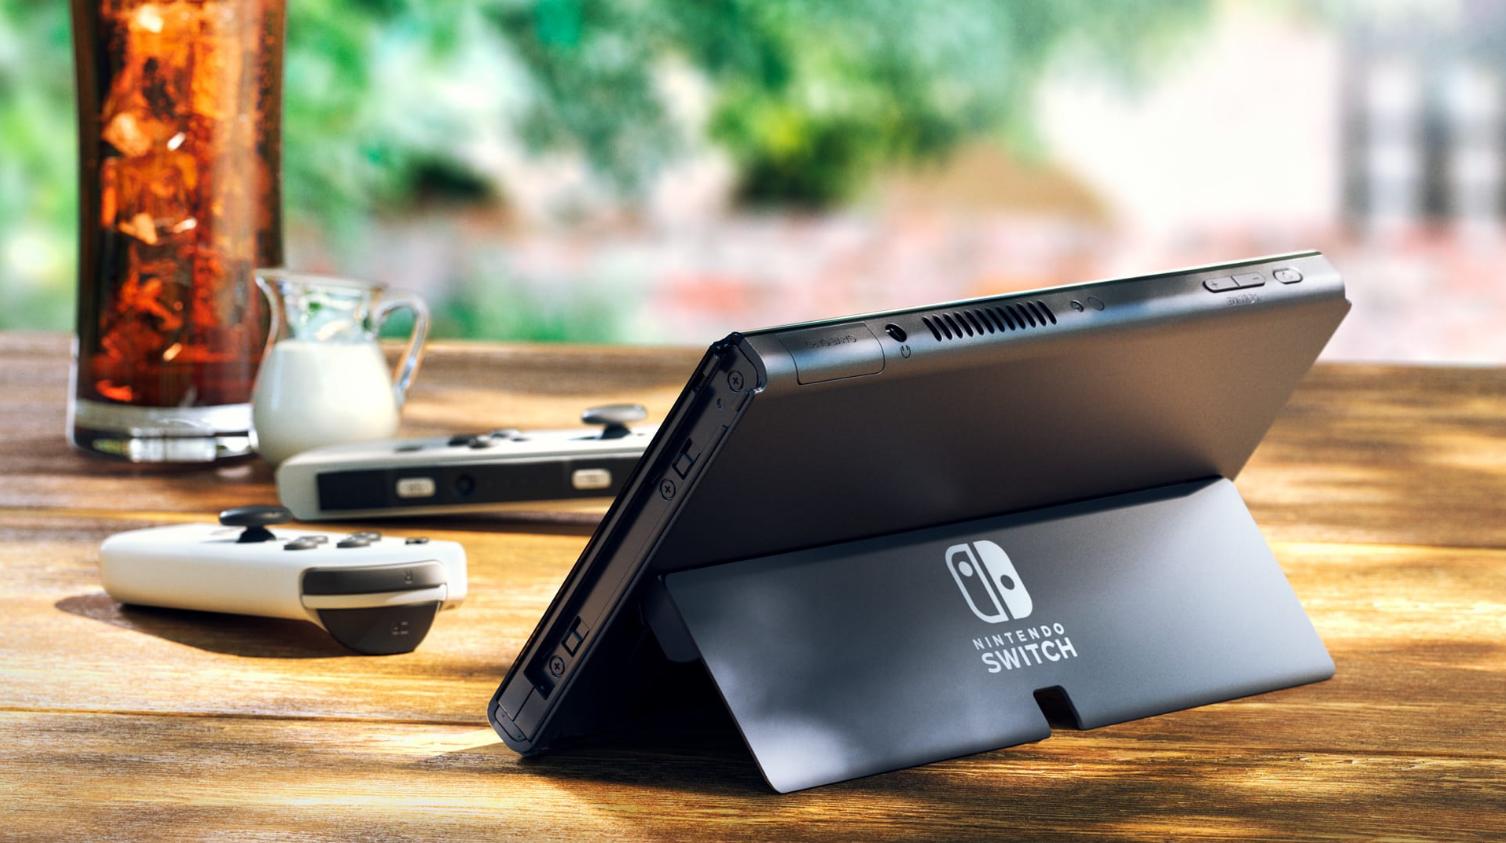 The Nintendo Switch (OLED Model) is not the upgrade we wanted | iMore